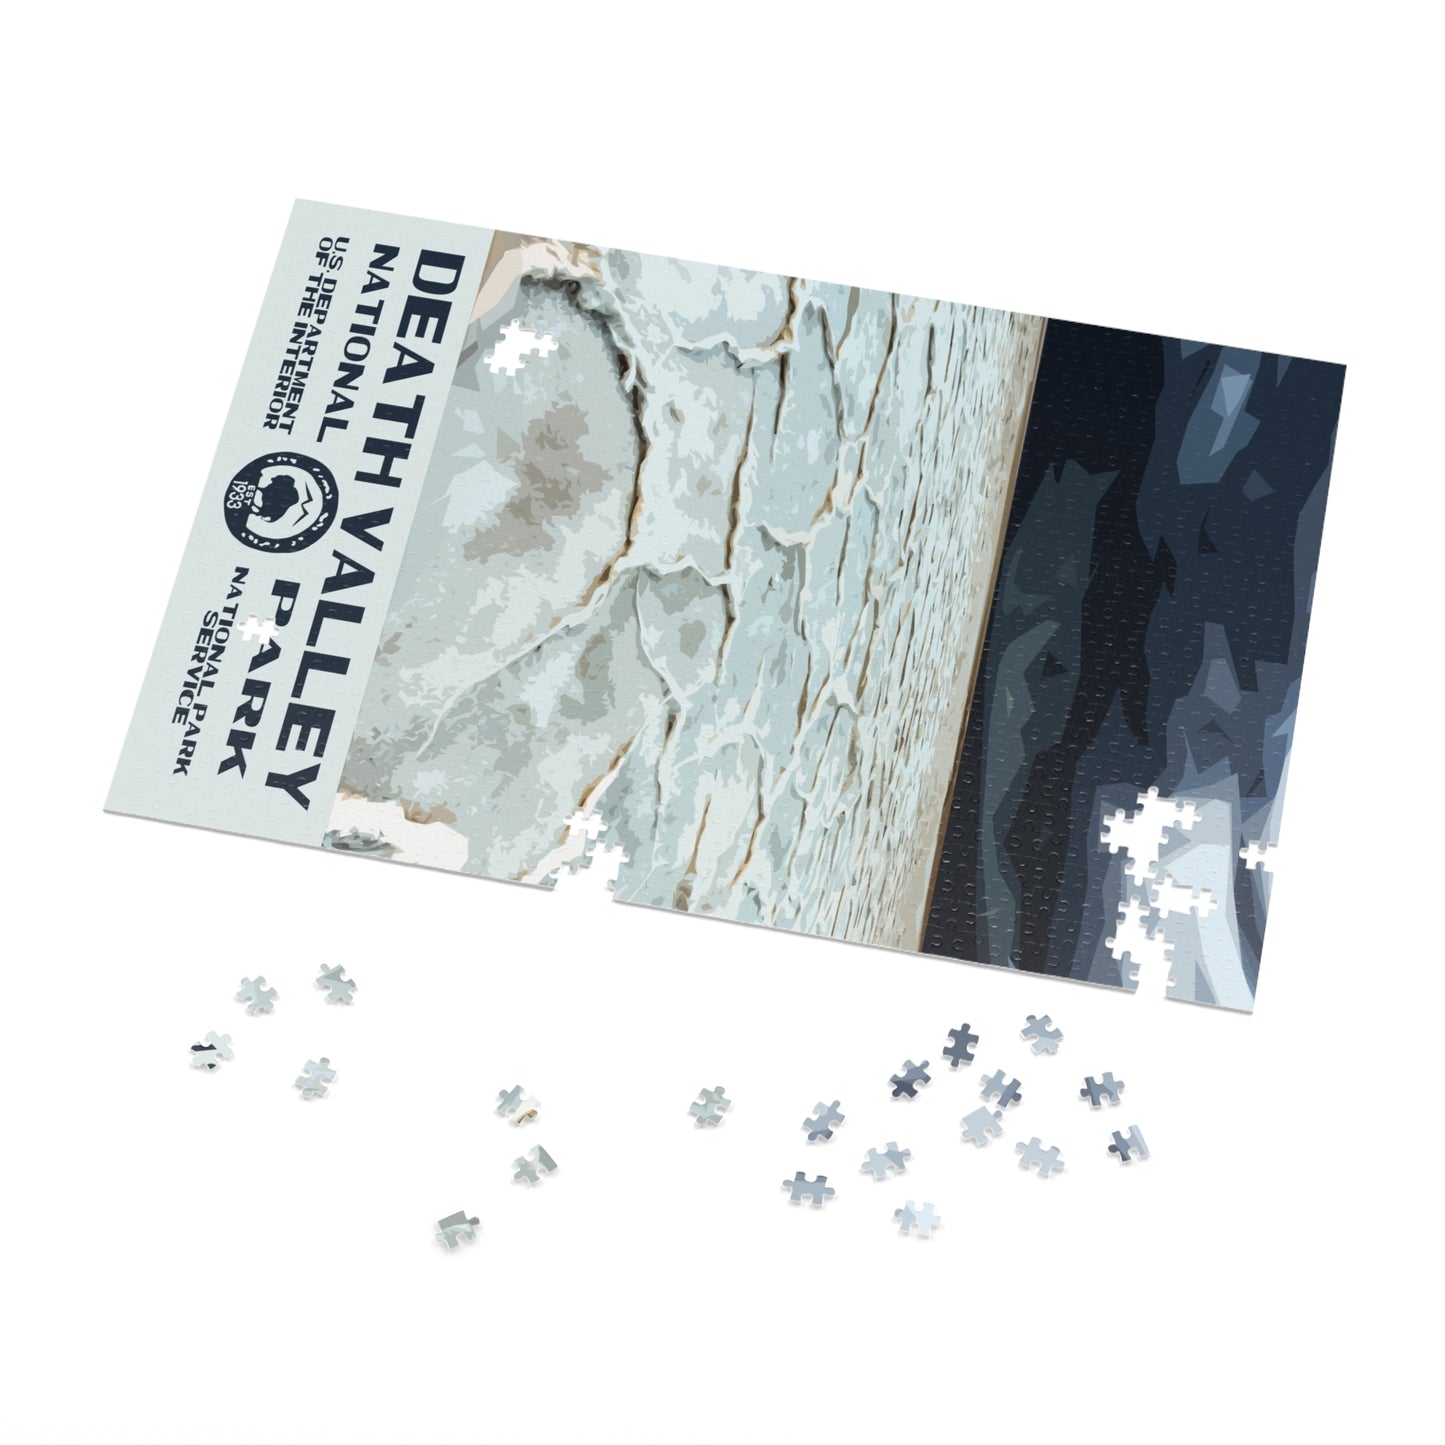 Death Valley National Park Jigsaw Puzzle - Badwater Basin - 1000 Pieces